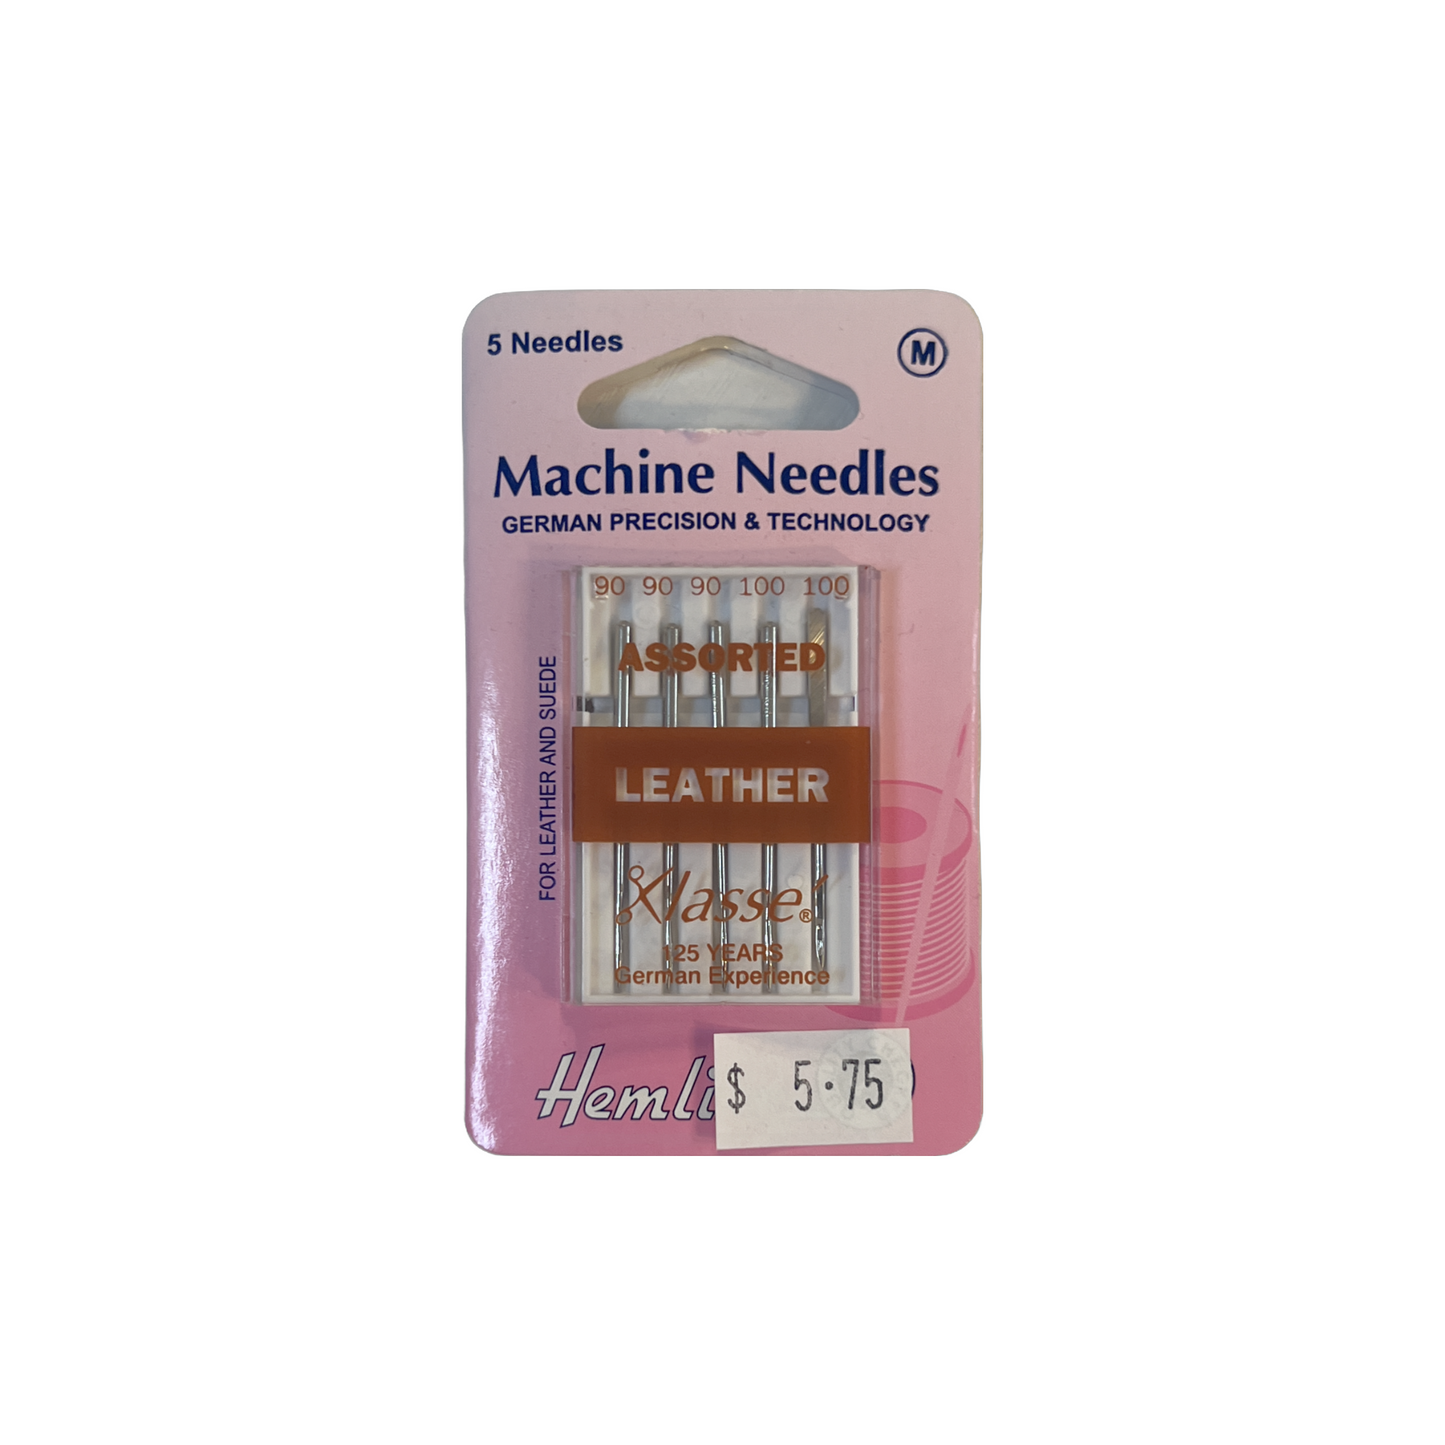 Hemline Assorted Chisel Point Leather Sewing Machine Needles